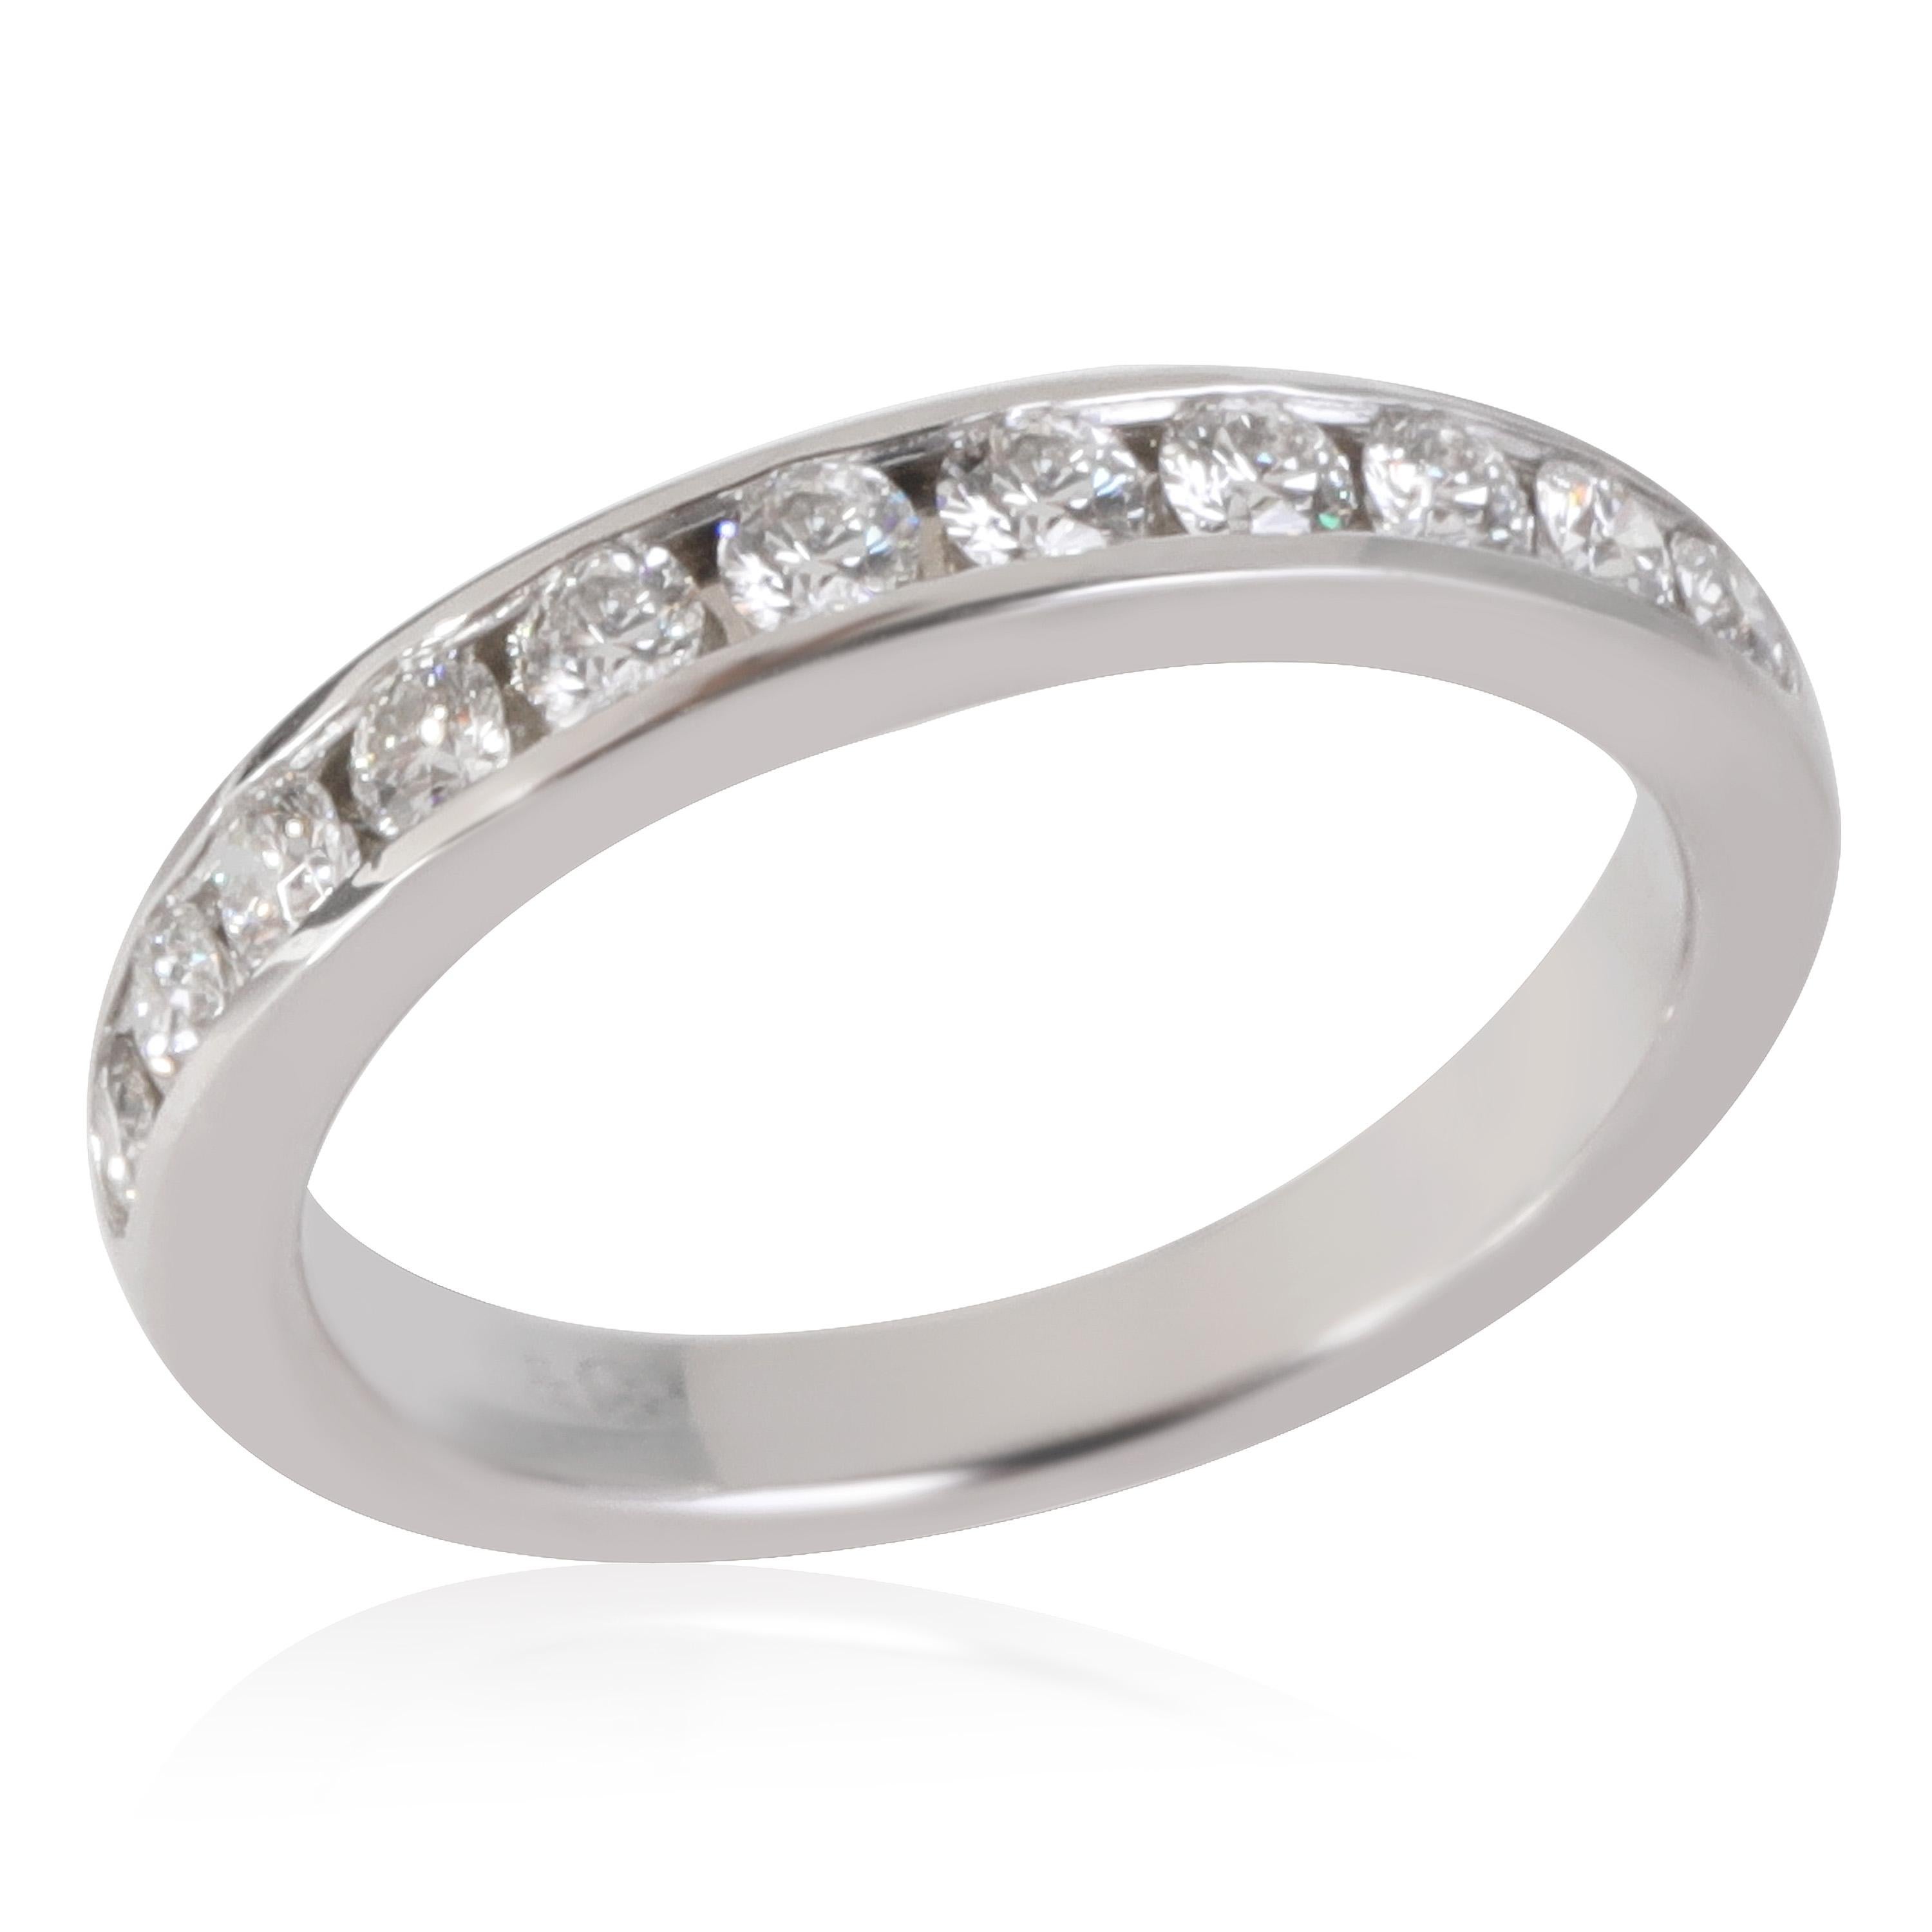 Tiffany & Co. Channel Set Diamond Wedding Band in Platinum 0.33 CTW

PRIMARY DETAILS
SKU: 118662
Listing Title: Tiffany & Co. Channel Set Diamond Wedding Band in Platinum 0.33 CTW
Condition Description: Retails for 3700 USD. In excellent condition